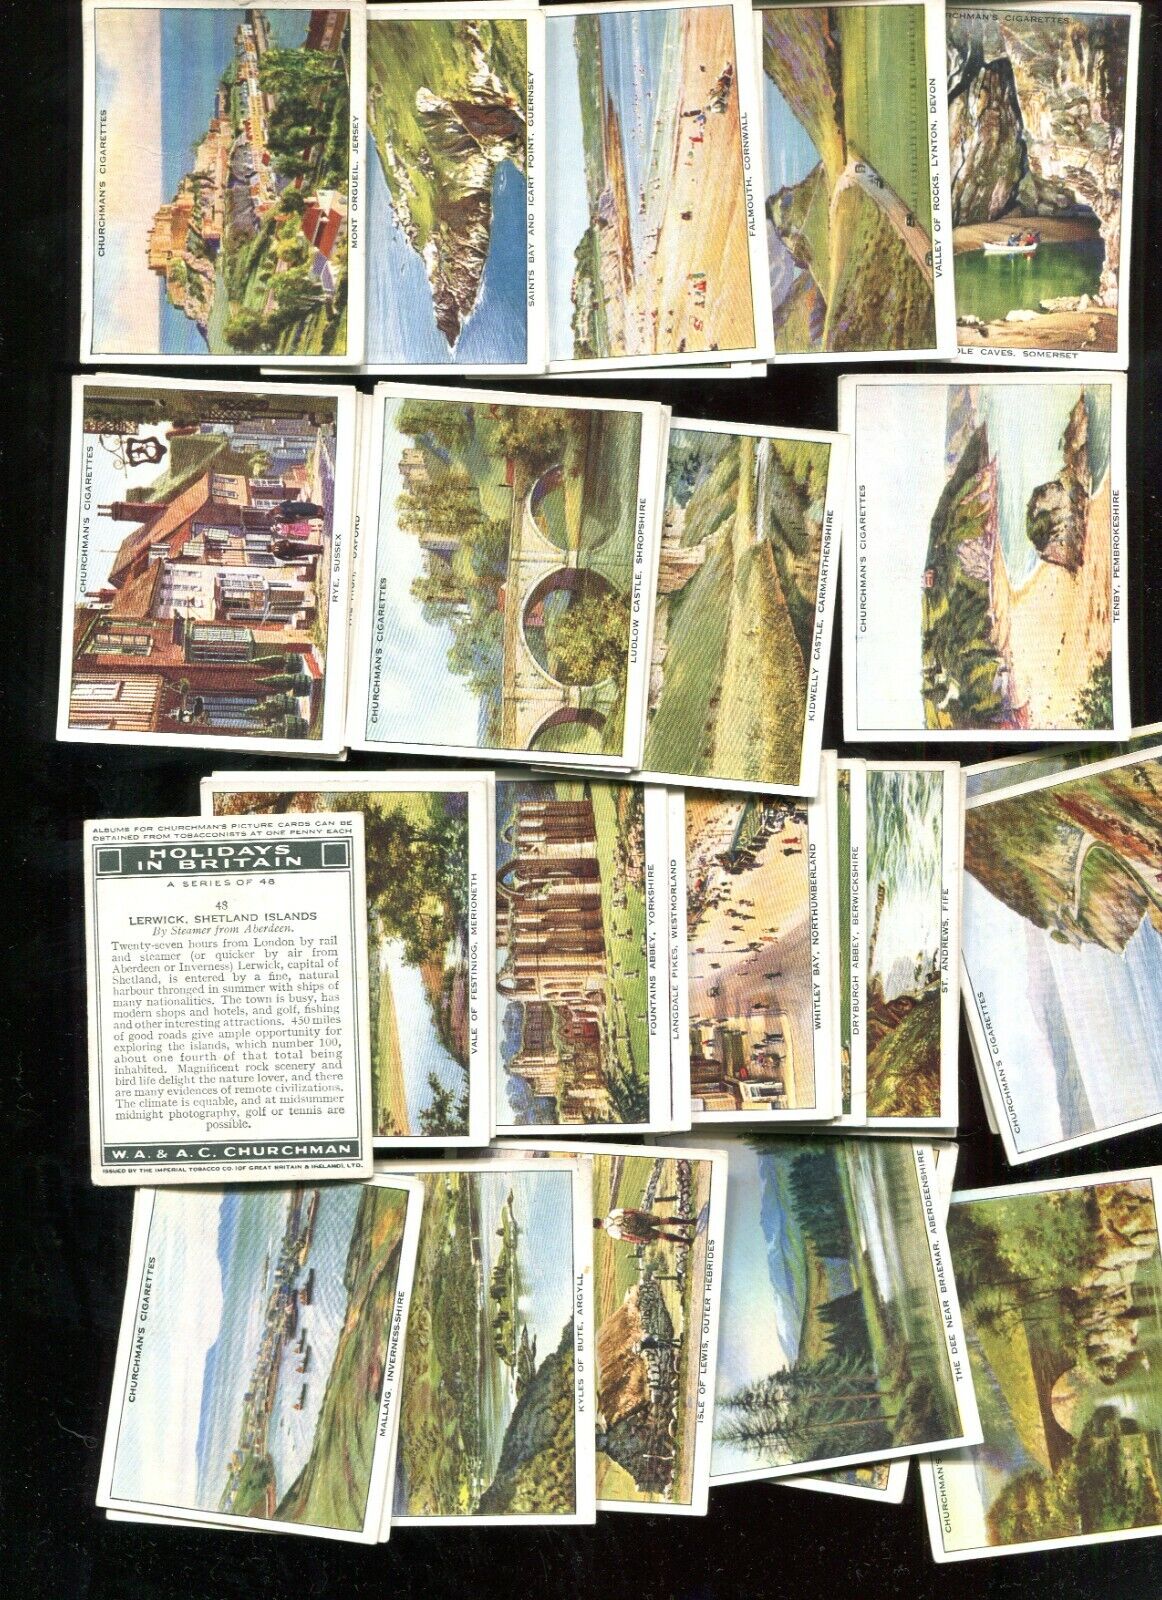 1938 W.A. & A.C. CHURCHMAN CIGARETTES HOLIDAYS IN BRITAIN COMPLETE 48 CARD SET